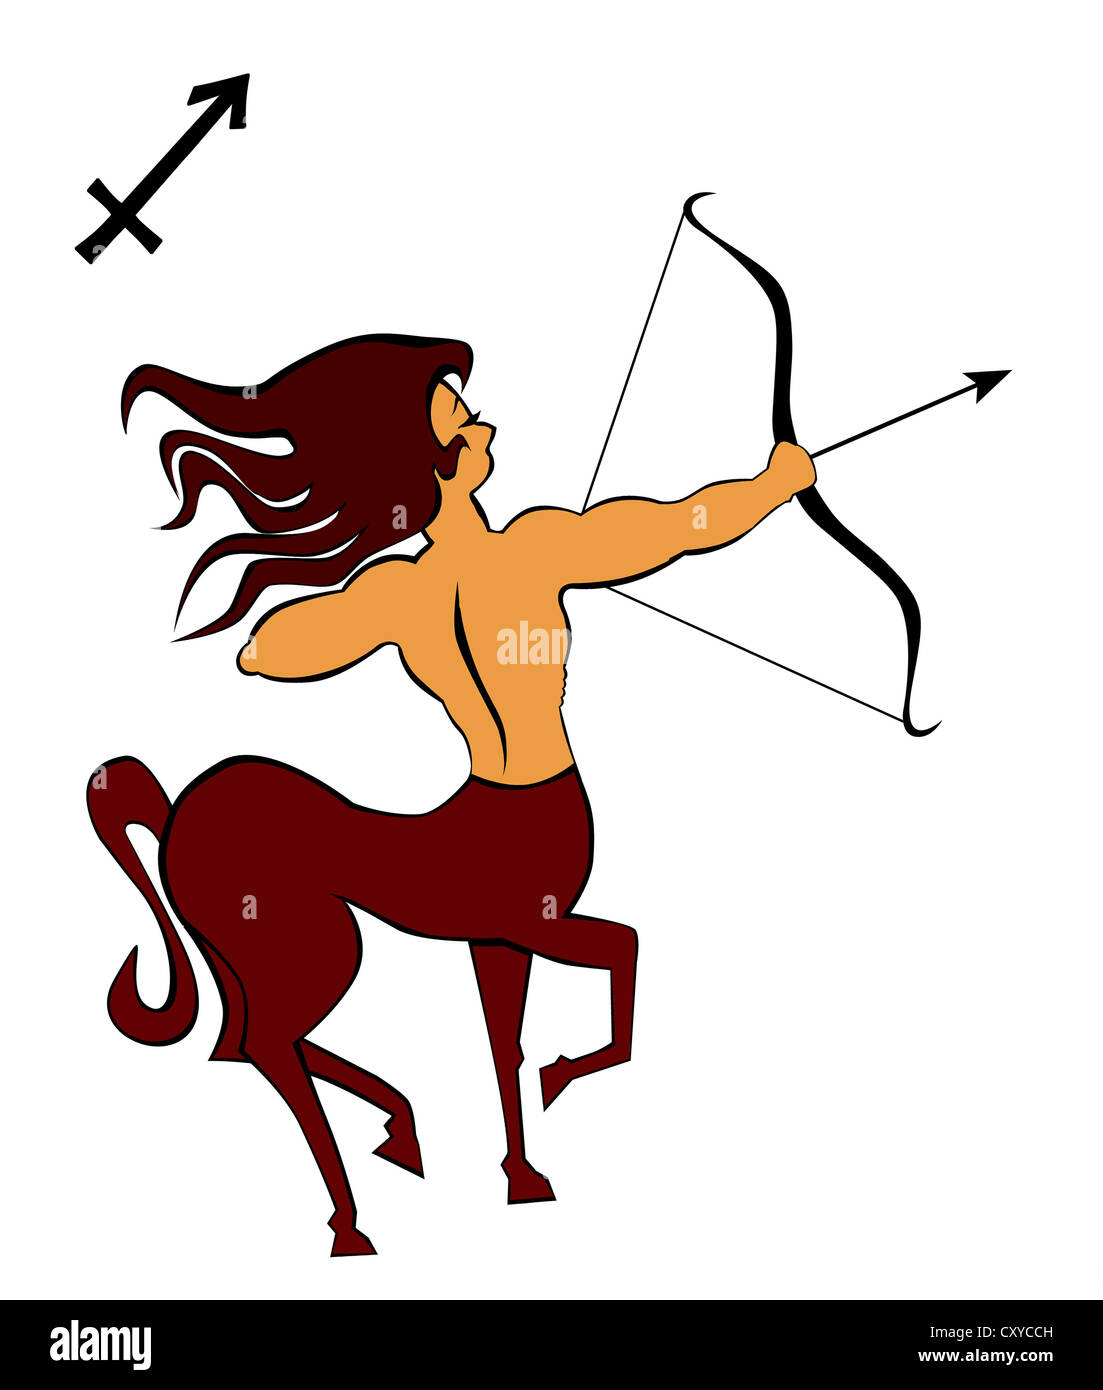 Sagittarius Cut Out Stock Images & Pictures - Alamy